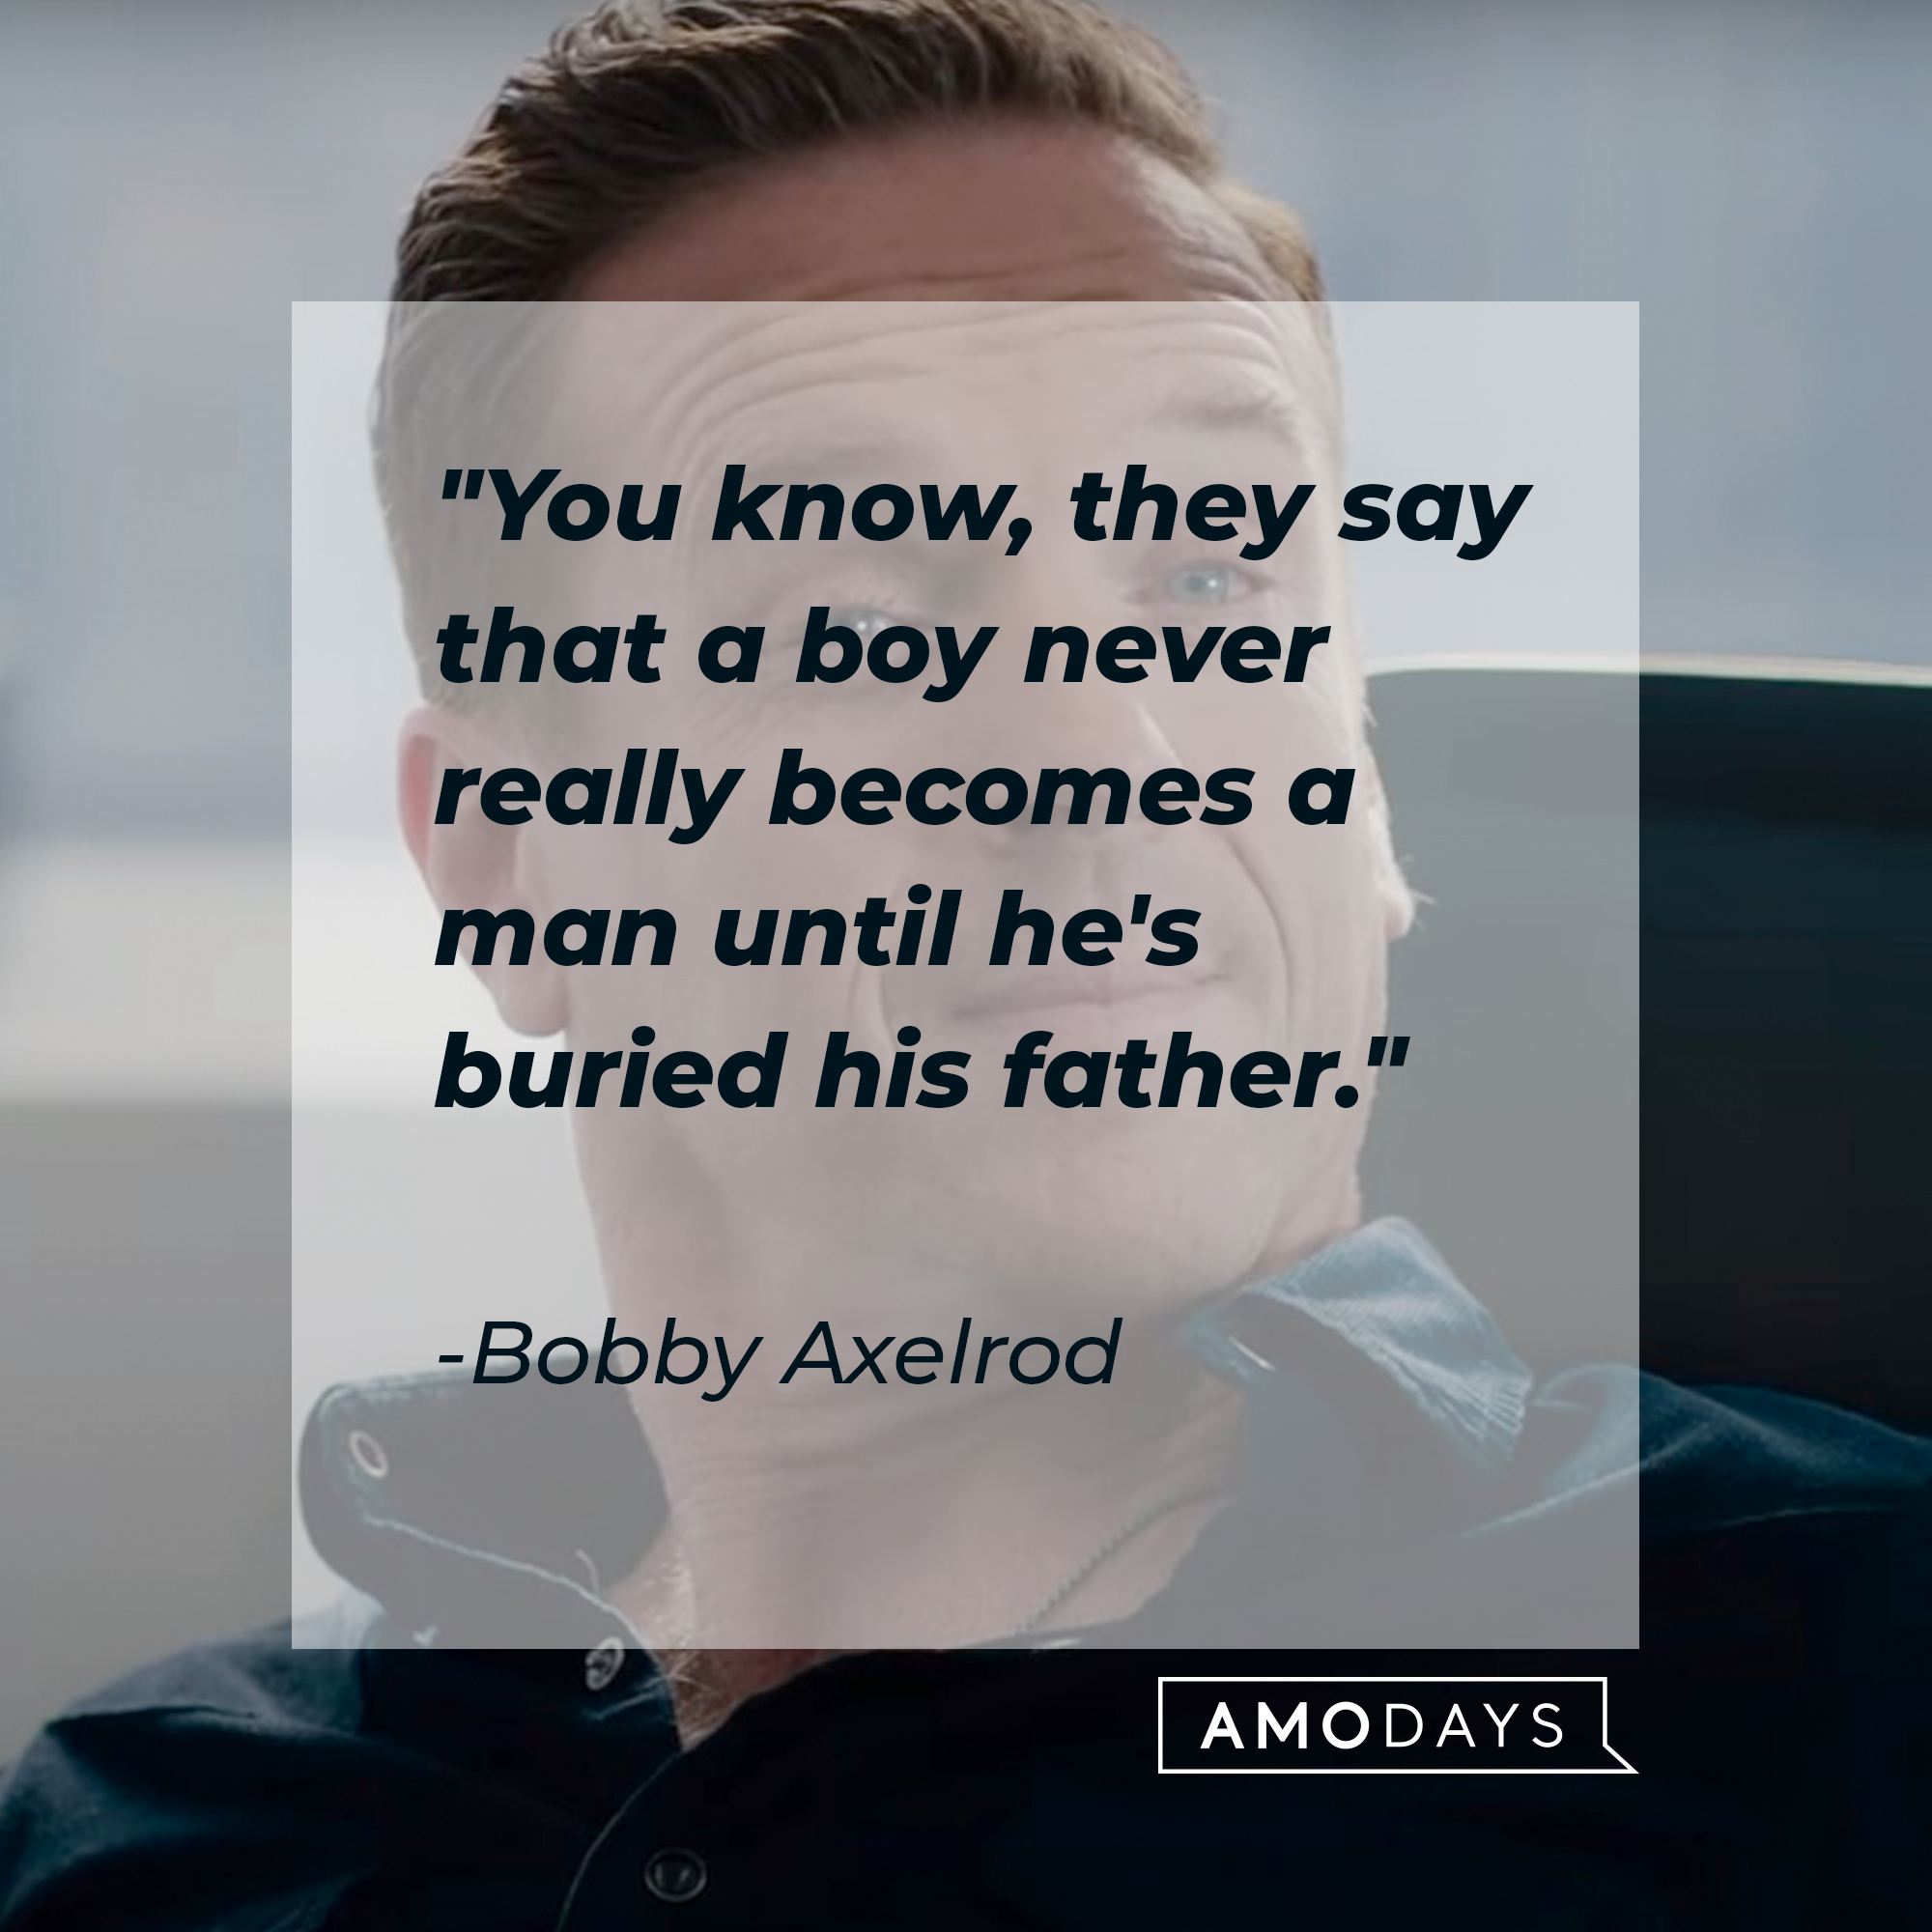 Bobby Axelrod's quote: "You know, they say that a boy never really becomes a man until he's buried his father." | Source: Youtube.com/BillionsOnShowtime